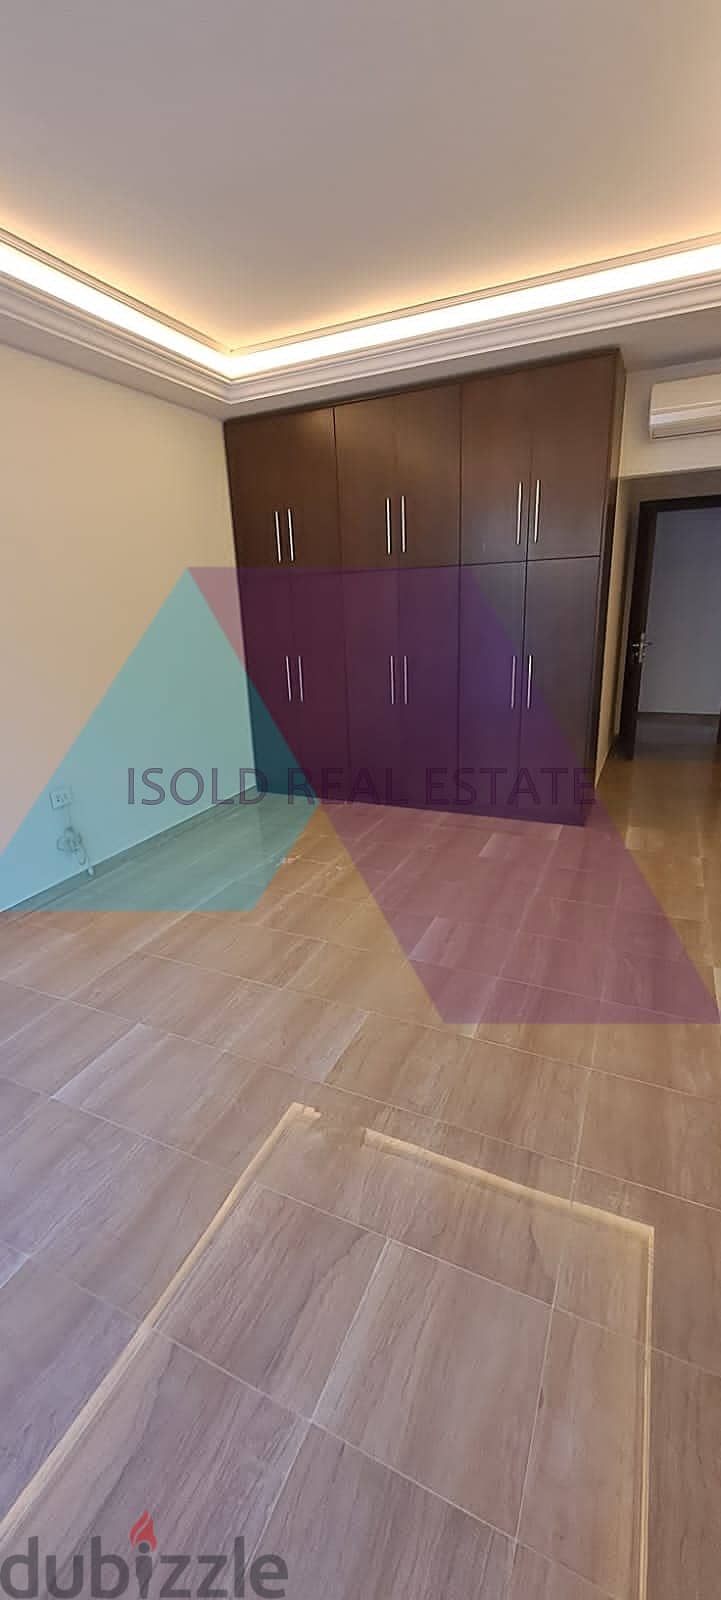 Luxurious 310 m2 apartment with 150m2 terrace for sale in Baabda 9